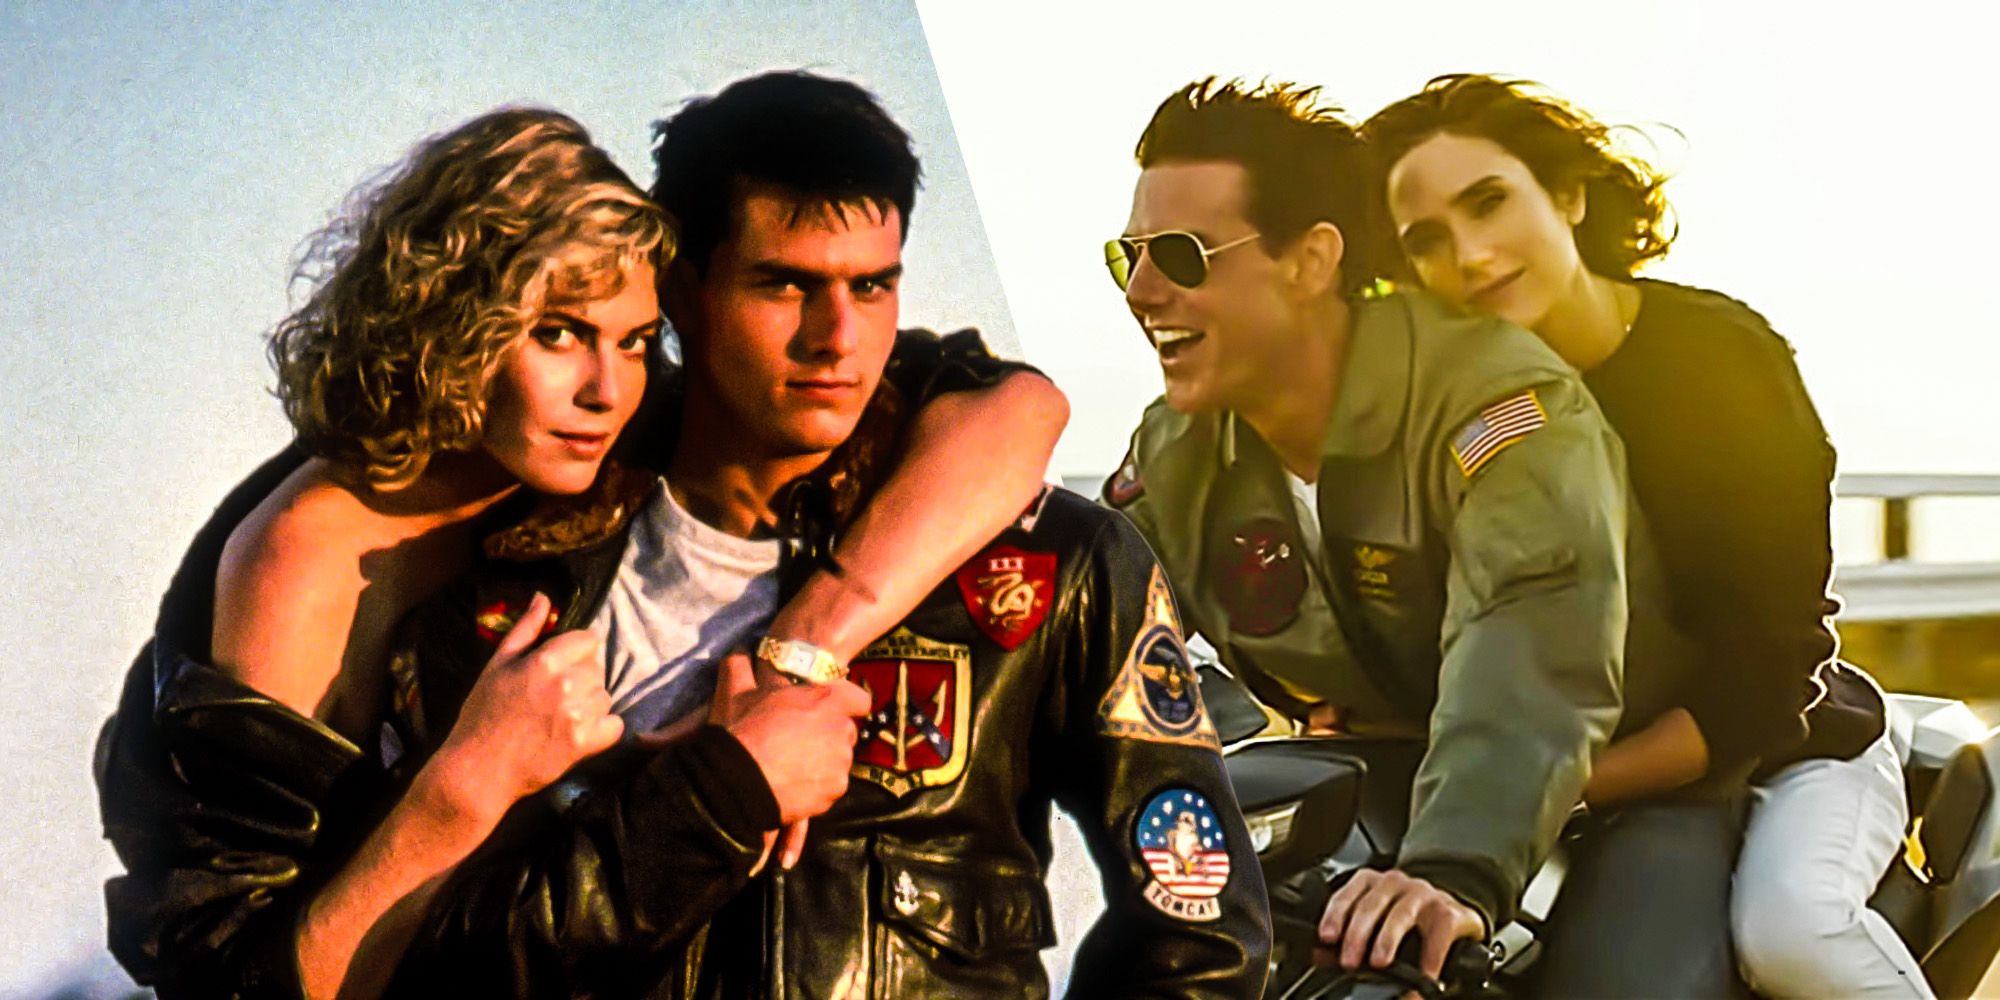 The Top Gun sequel is officially happening. 